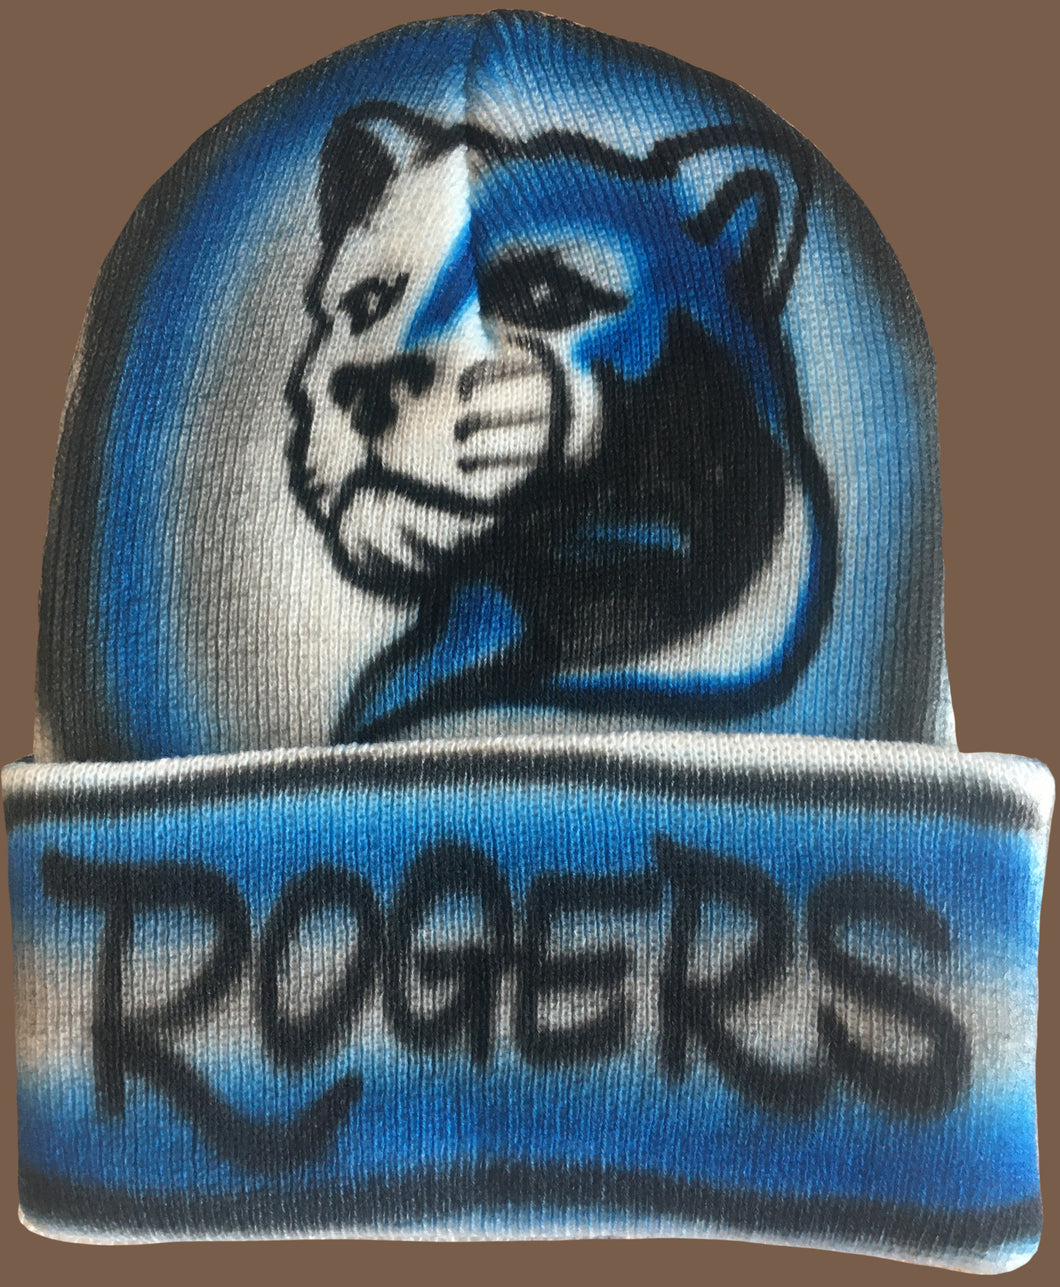 Rogers Royals Airbrush Hat